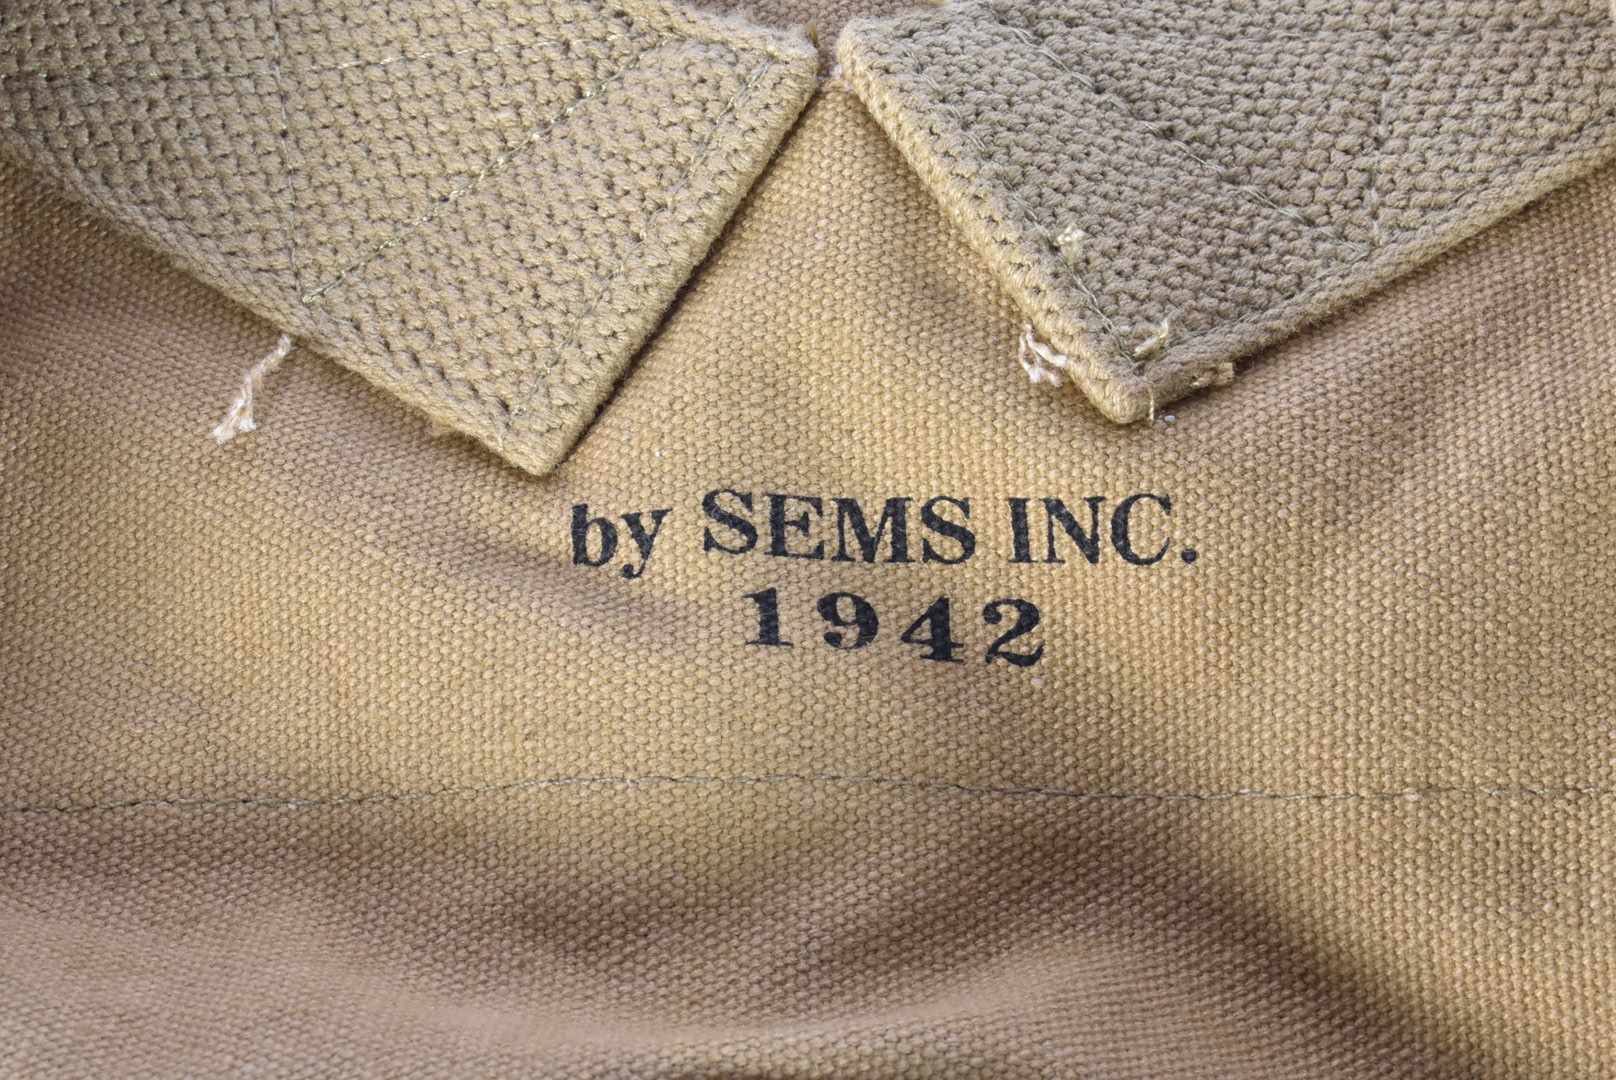 A US Universal Drop bag, stamped Sems Inc 1942, together with a Utility Pouch and a US Musette bag - Image 11 of 12